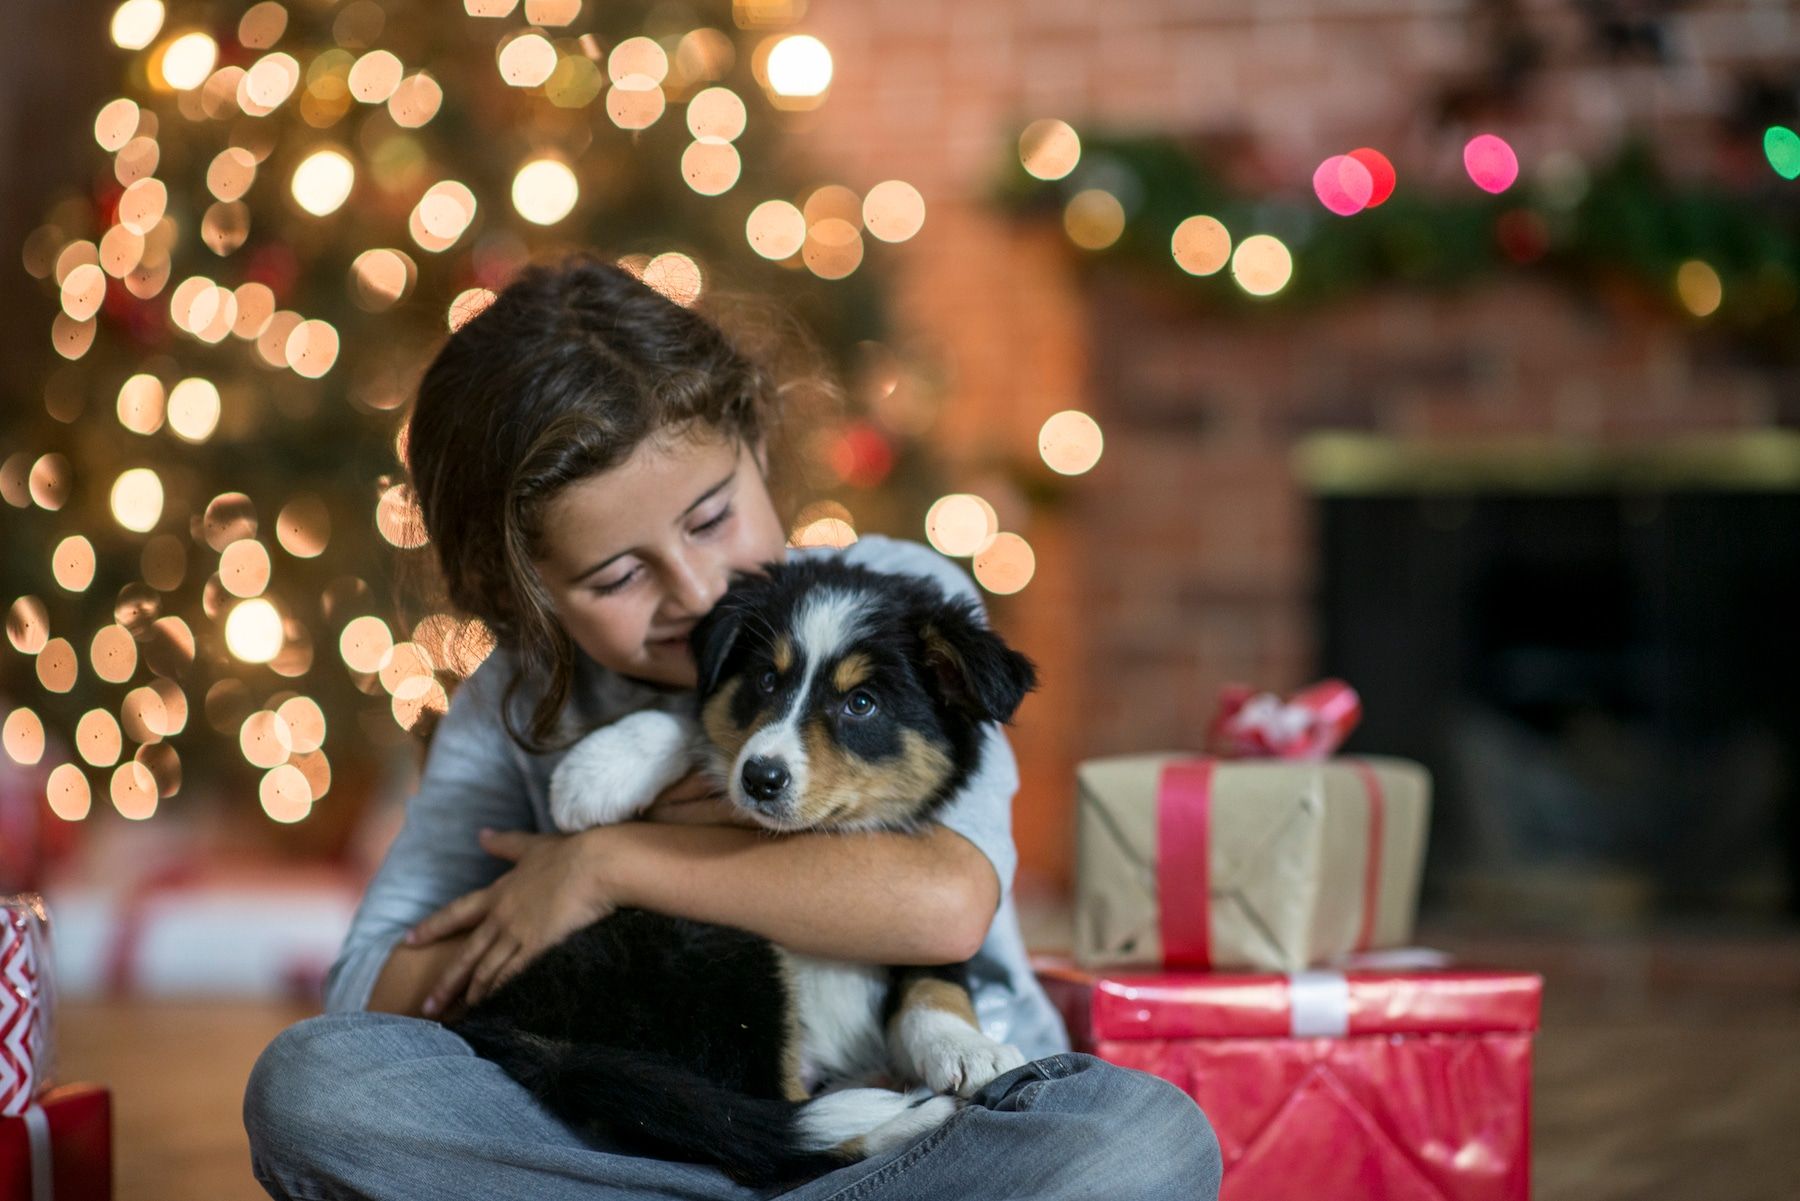 How to give pets as gifts